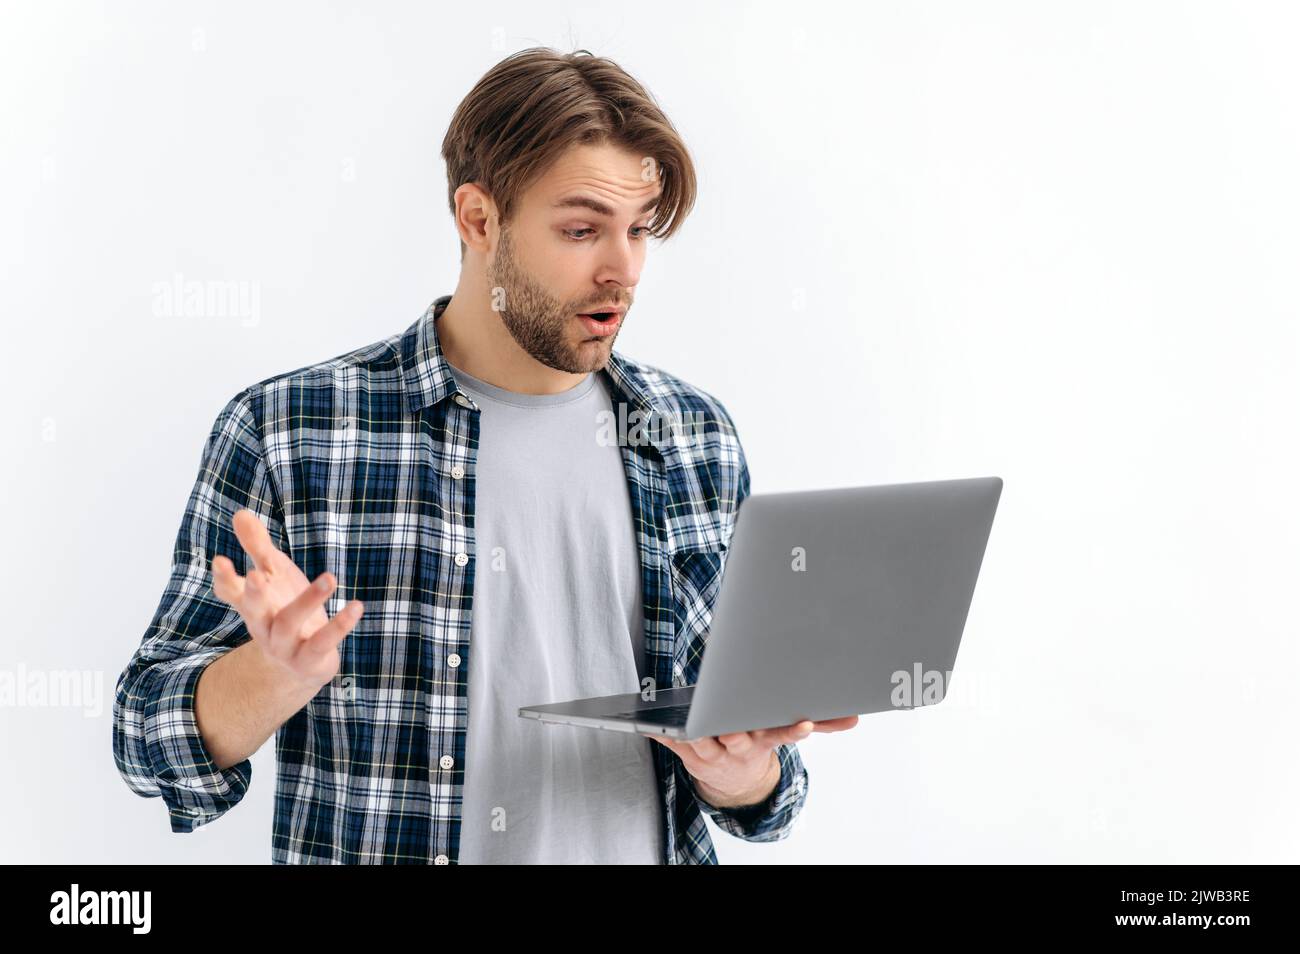 Shocked confused puzzled caucasian stylish young man, standing on a white isolated background, holds an open laptop, surprised looks at the screen, see unexpected news, message, gesturing with hand Stock Photo